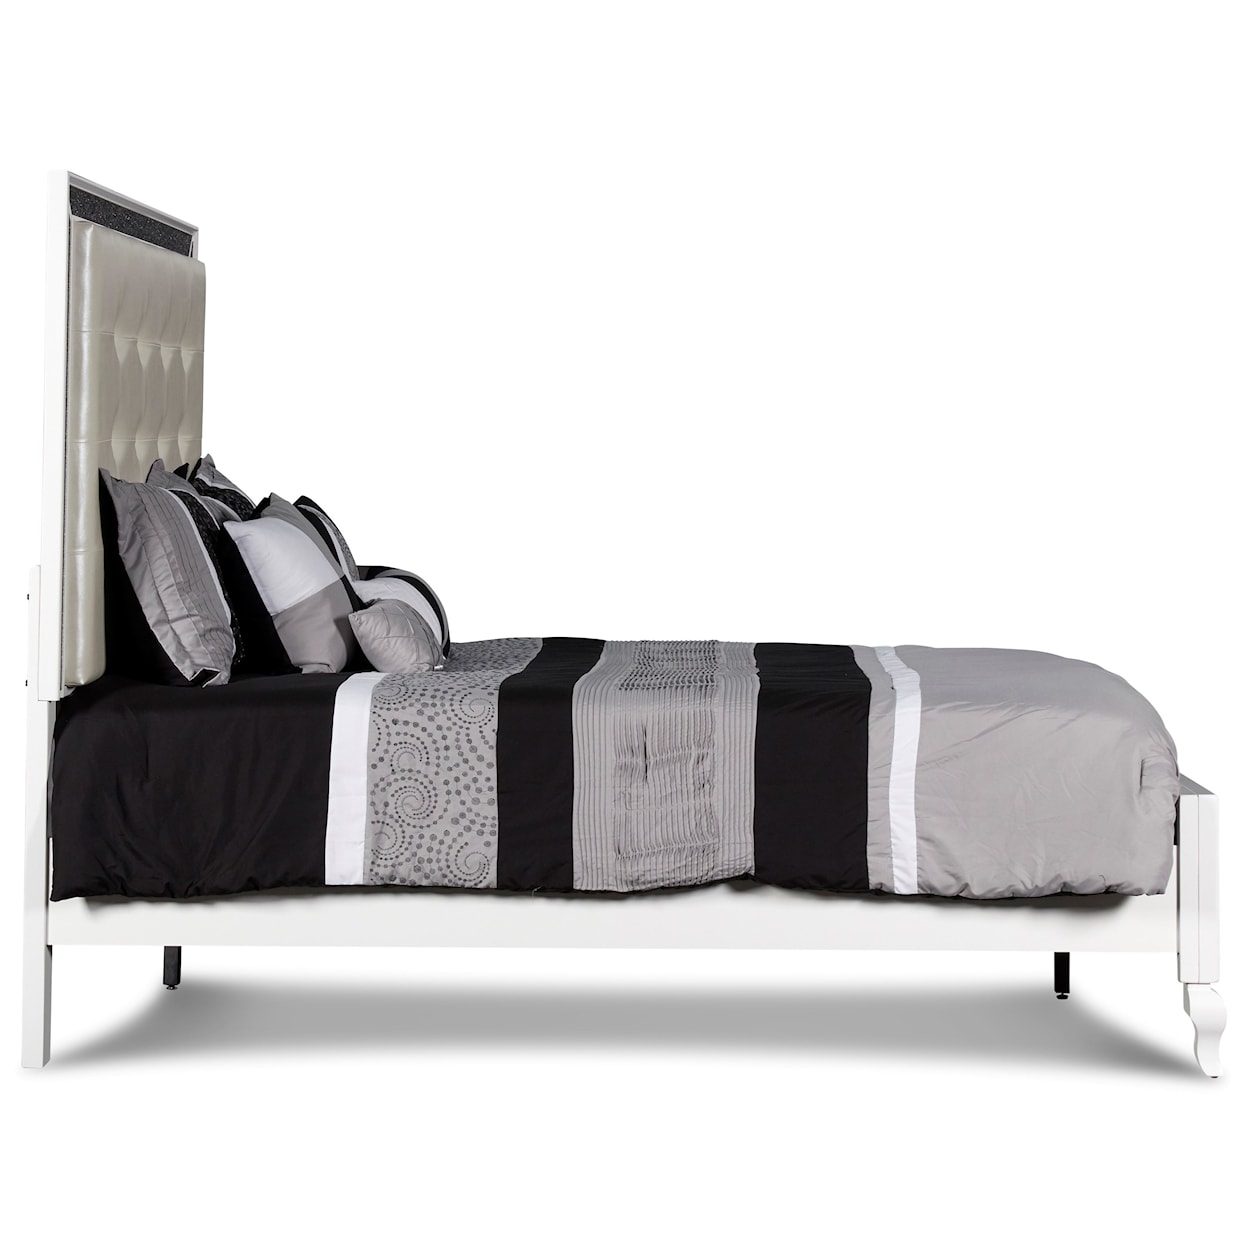 New Classic Furniture Park Imperial Full Bed